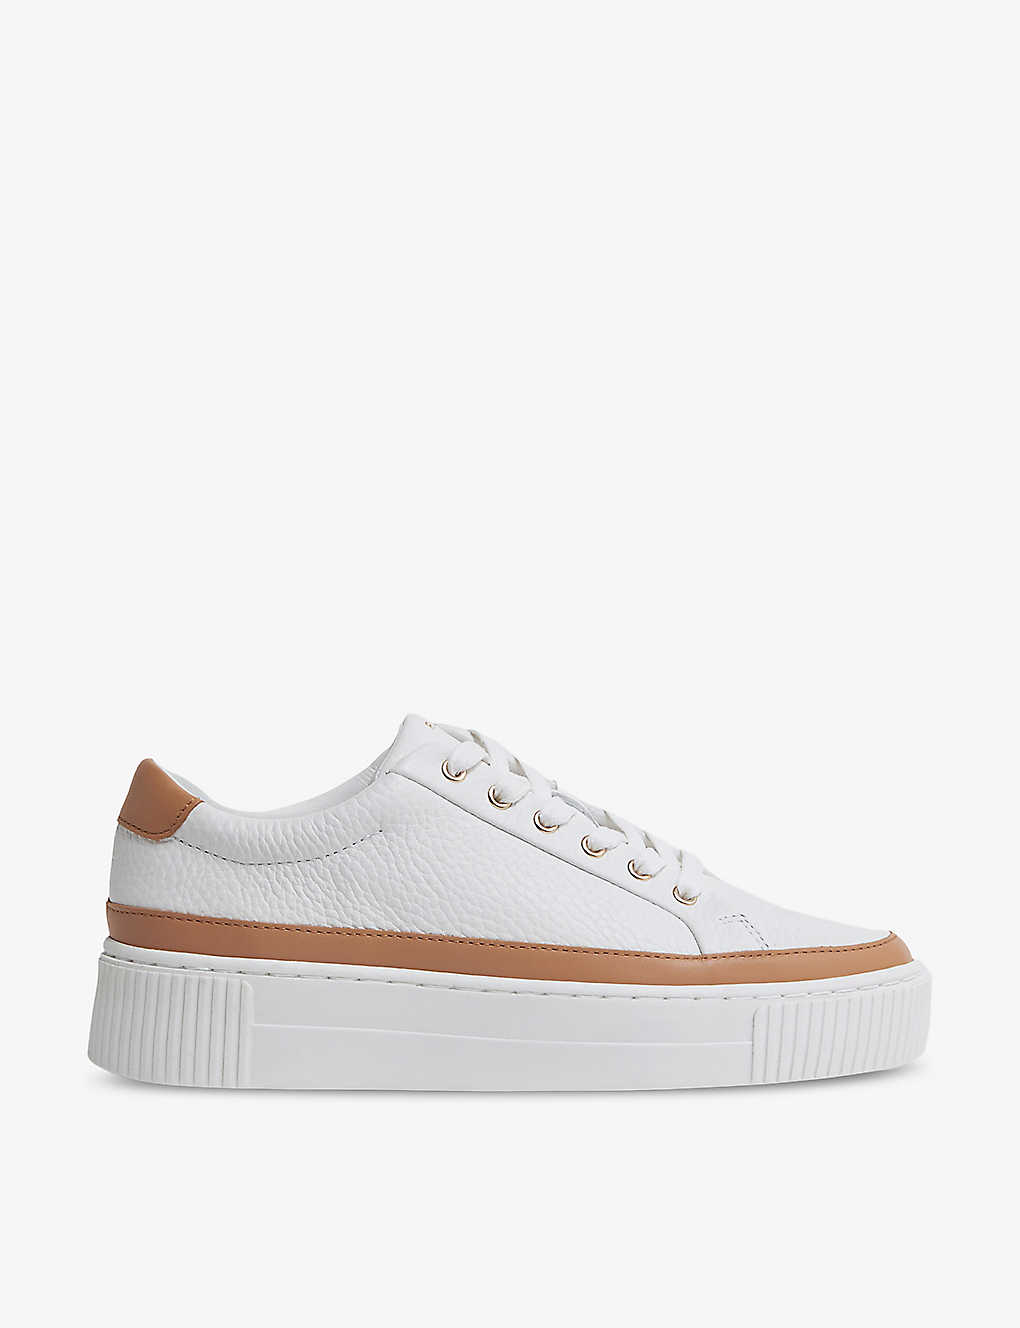 Shop Reiss Women's Camel/white Leanne Grained-leather Low-top Trainers